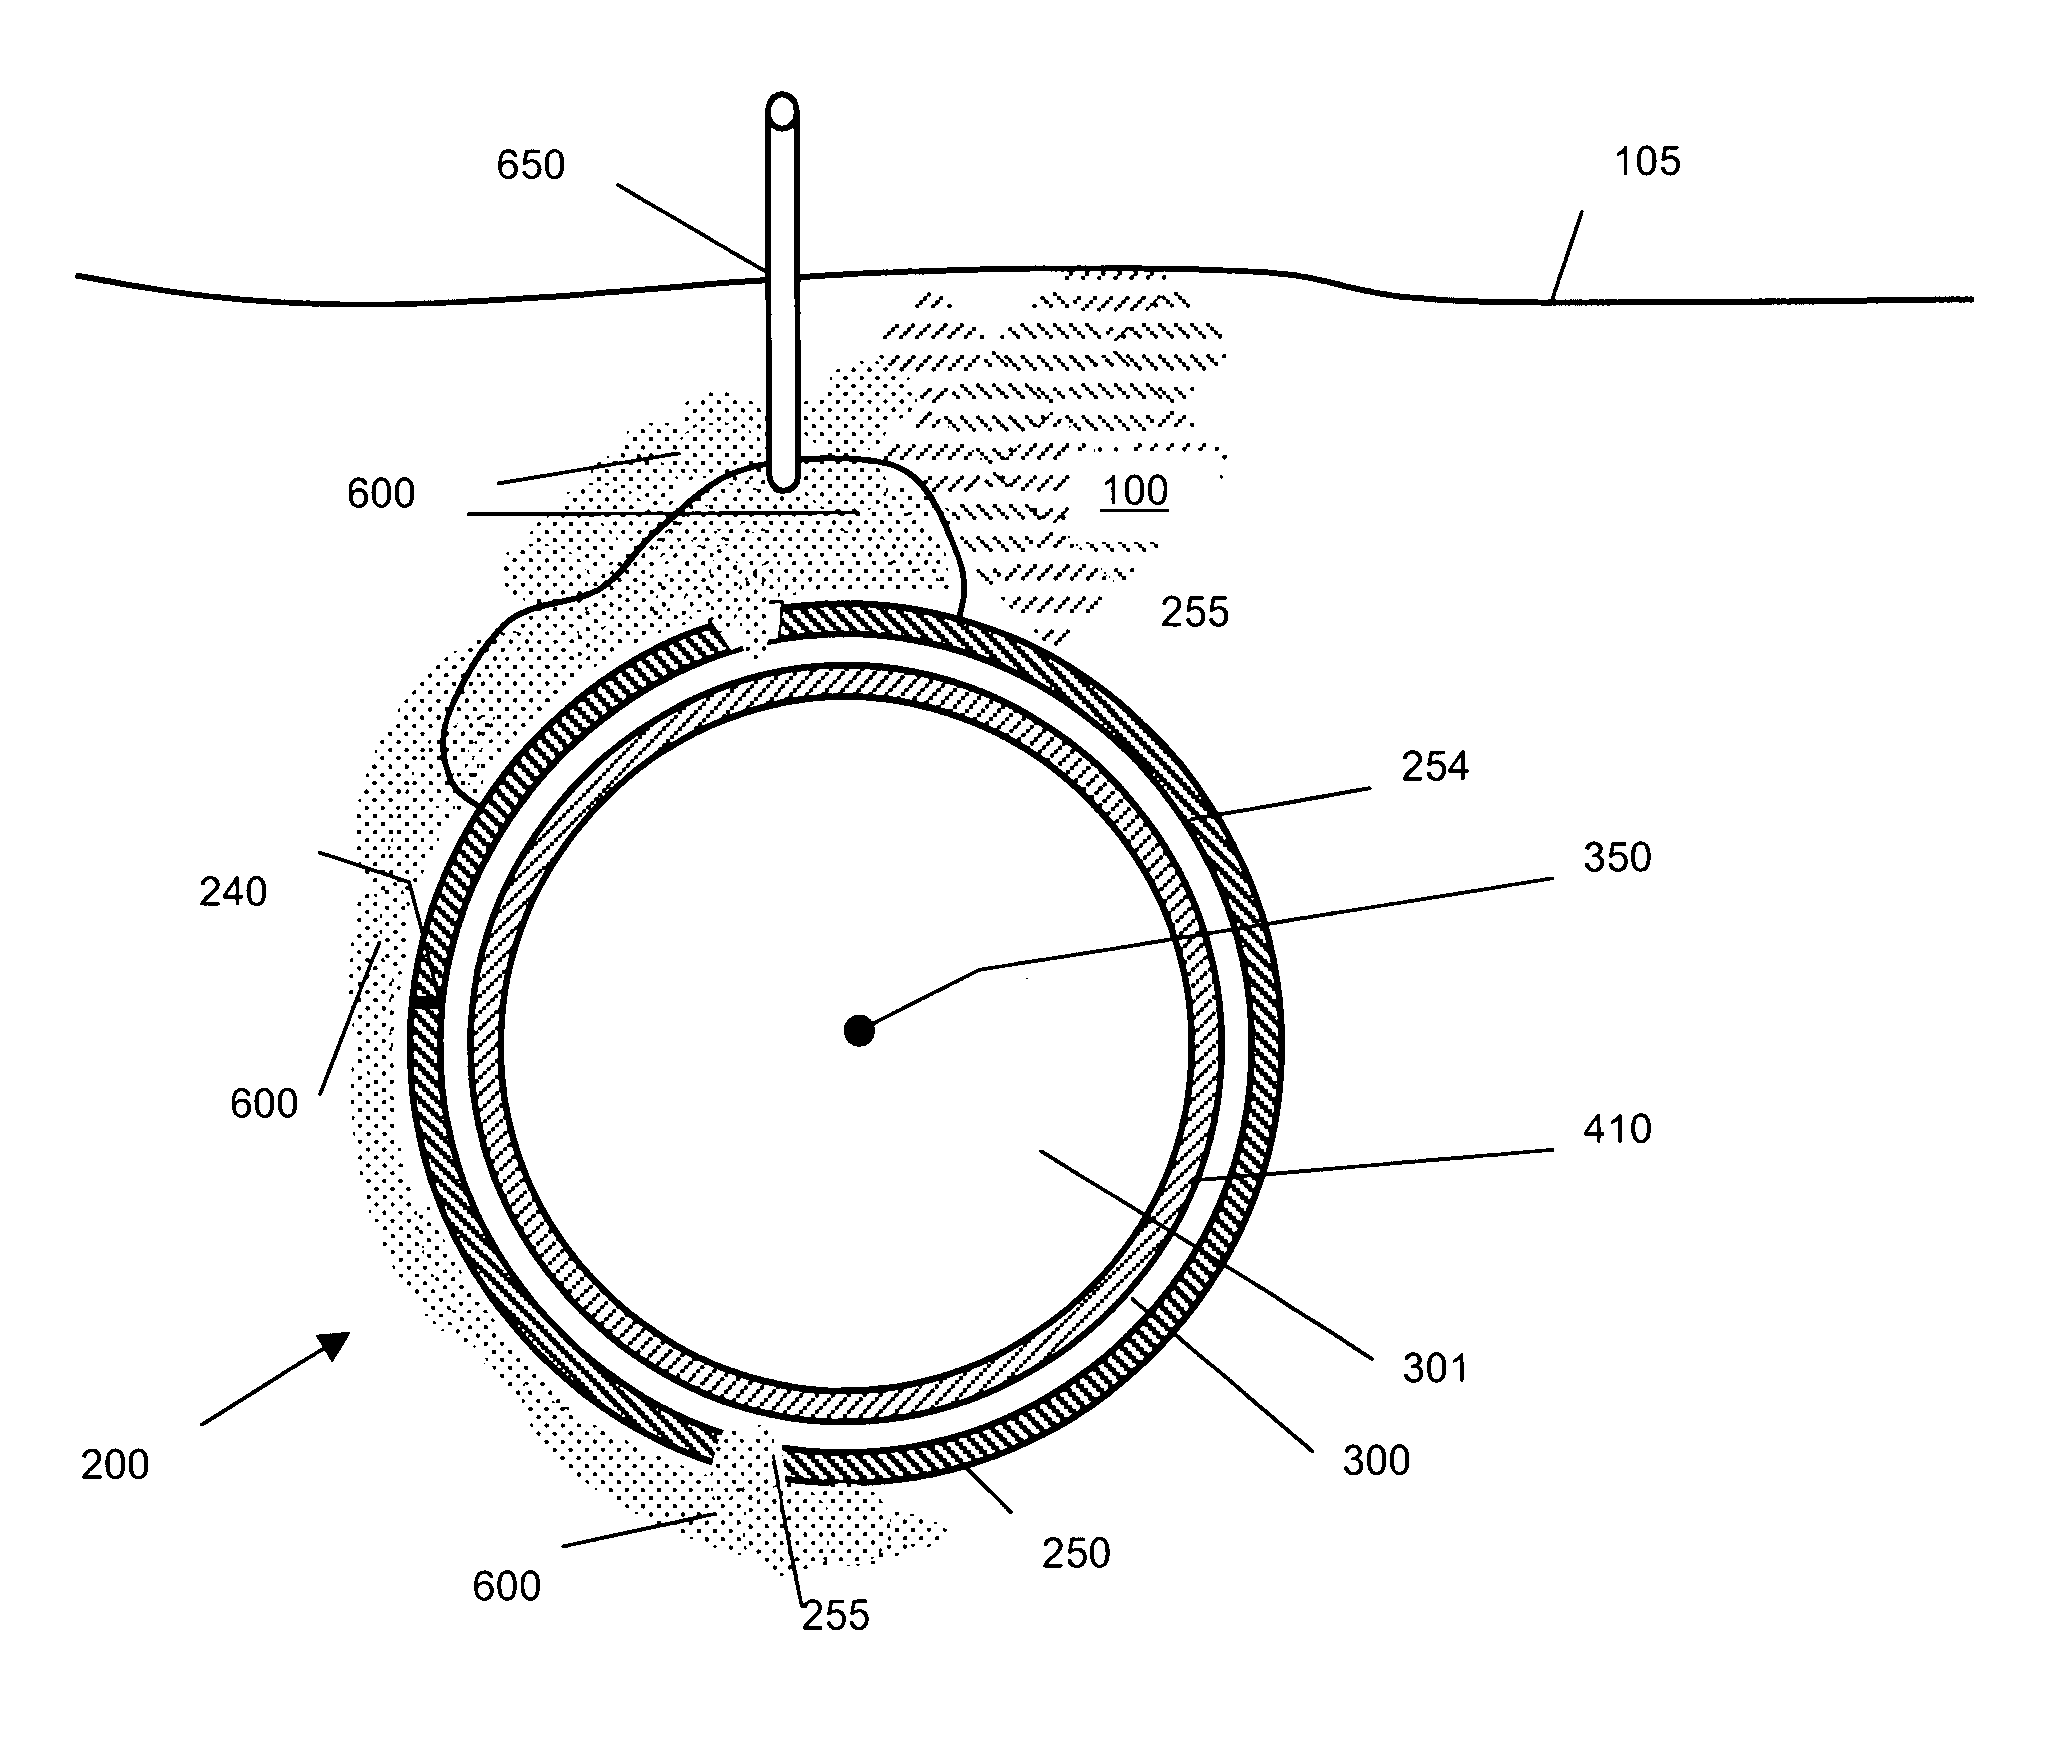 Apparatus and method for the repair and stabilization of underground pipes